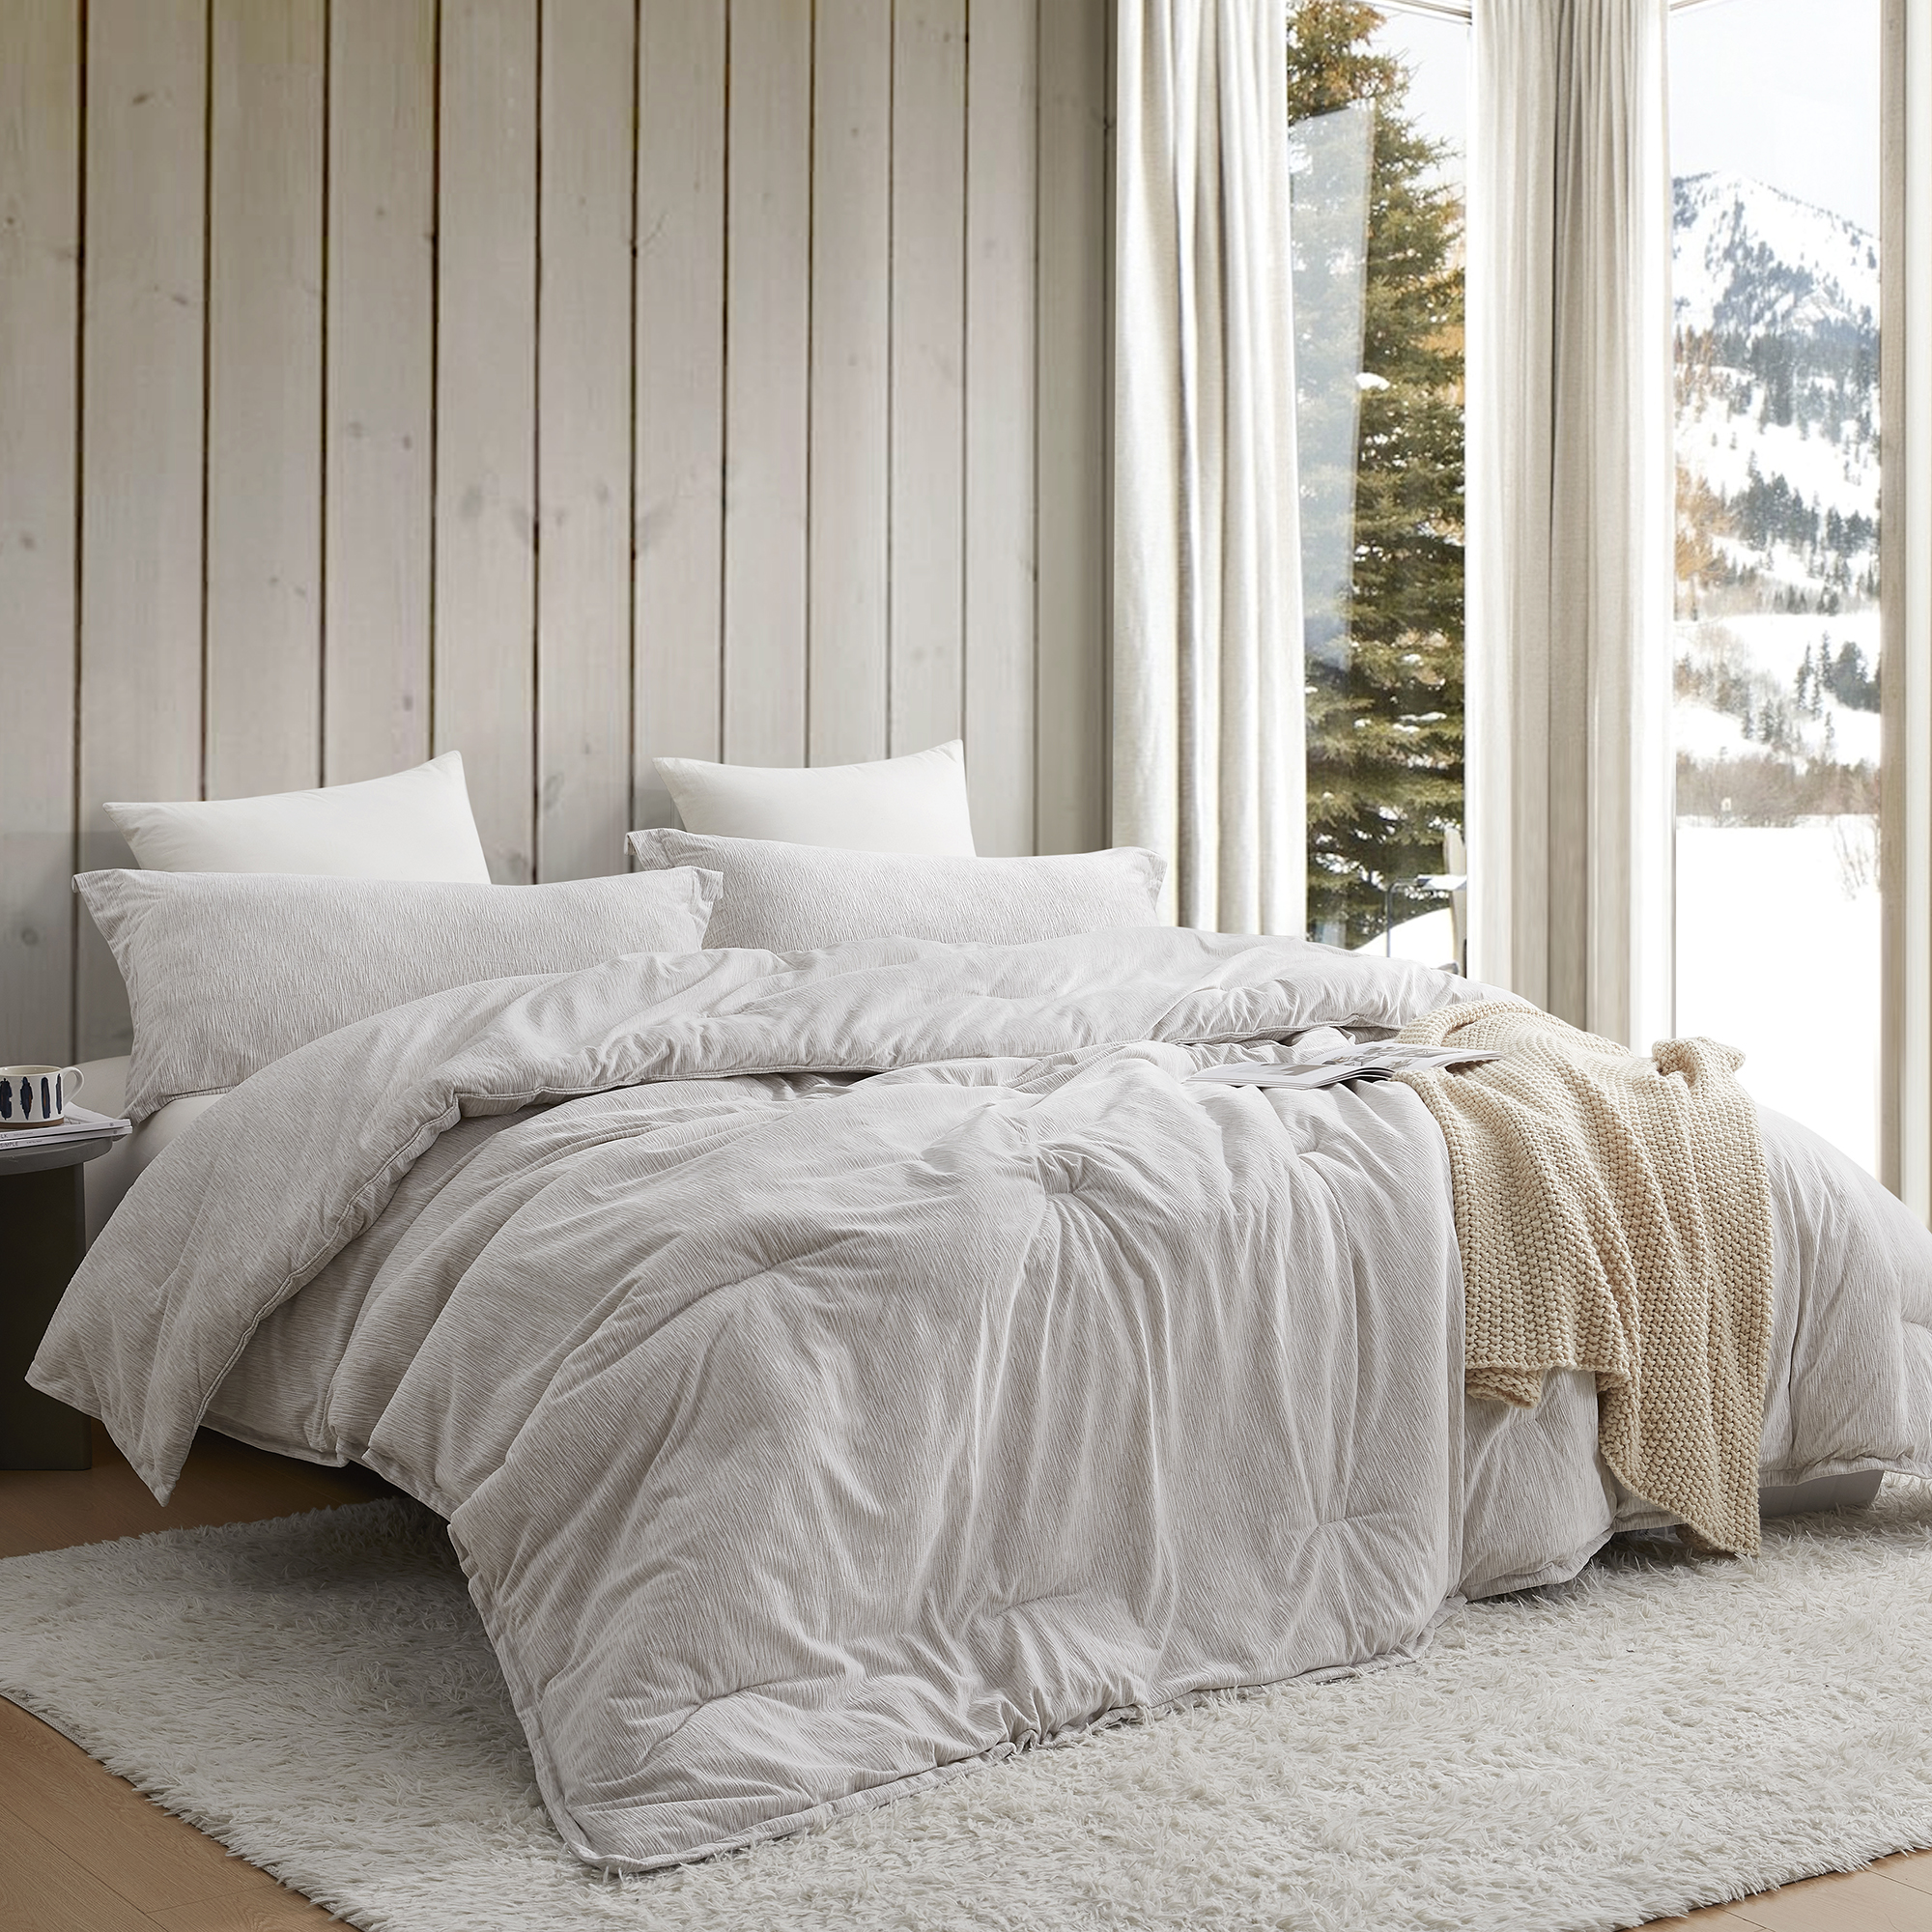 Daydreamer - Coma Inducer® Oversized Queen Comforter - Taupe Etch